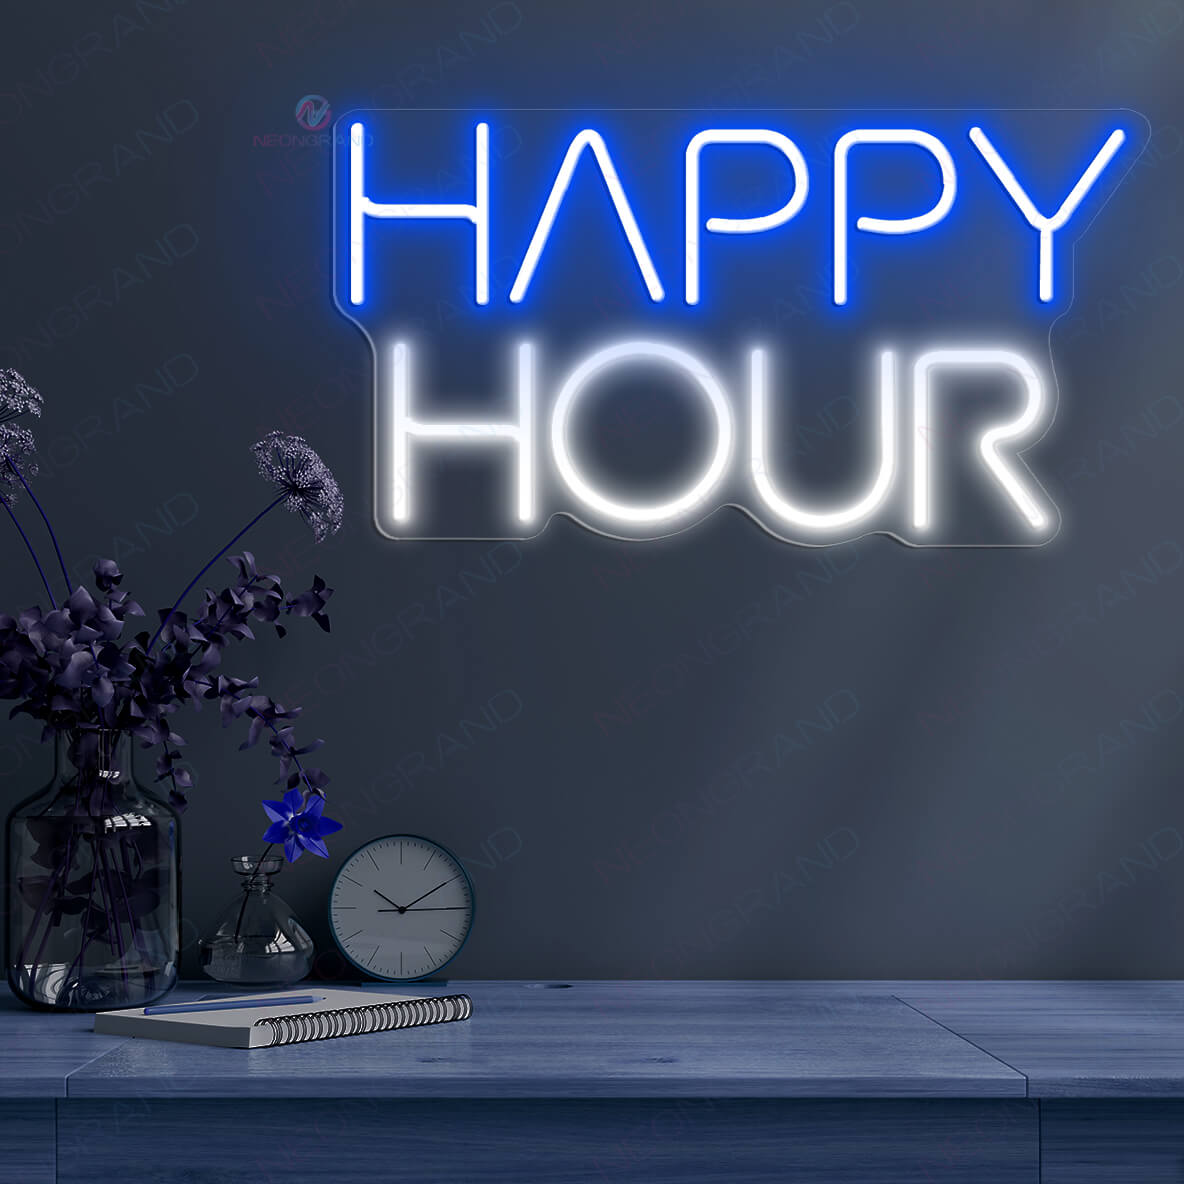 Happy Hour Neon Sign Inspiration Neon Sign Led Light blue